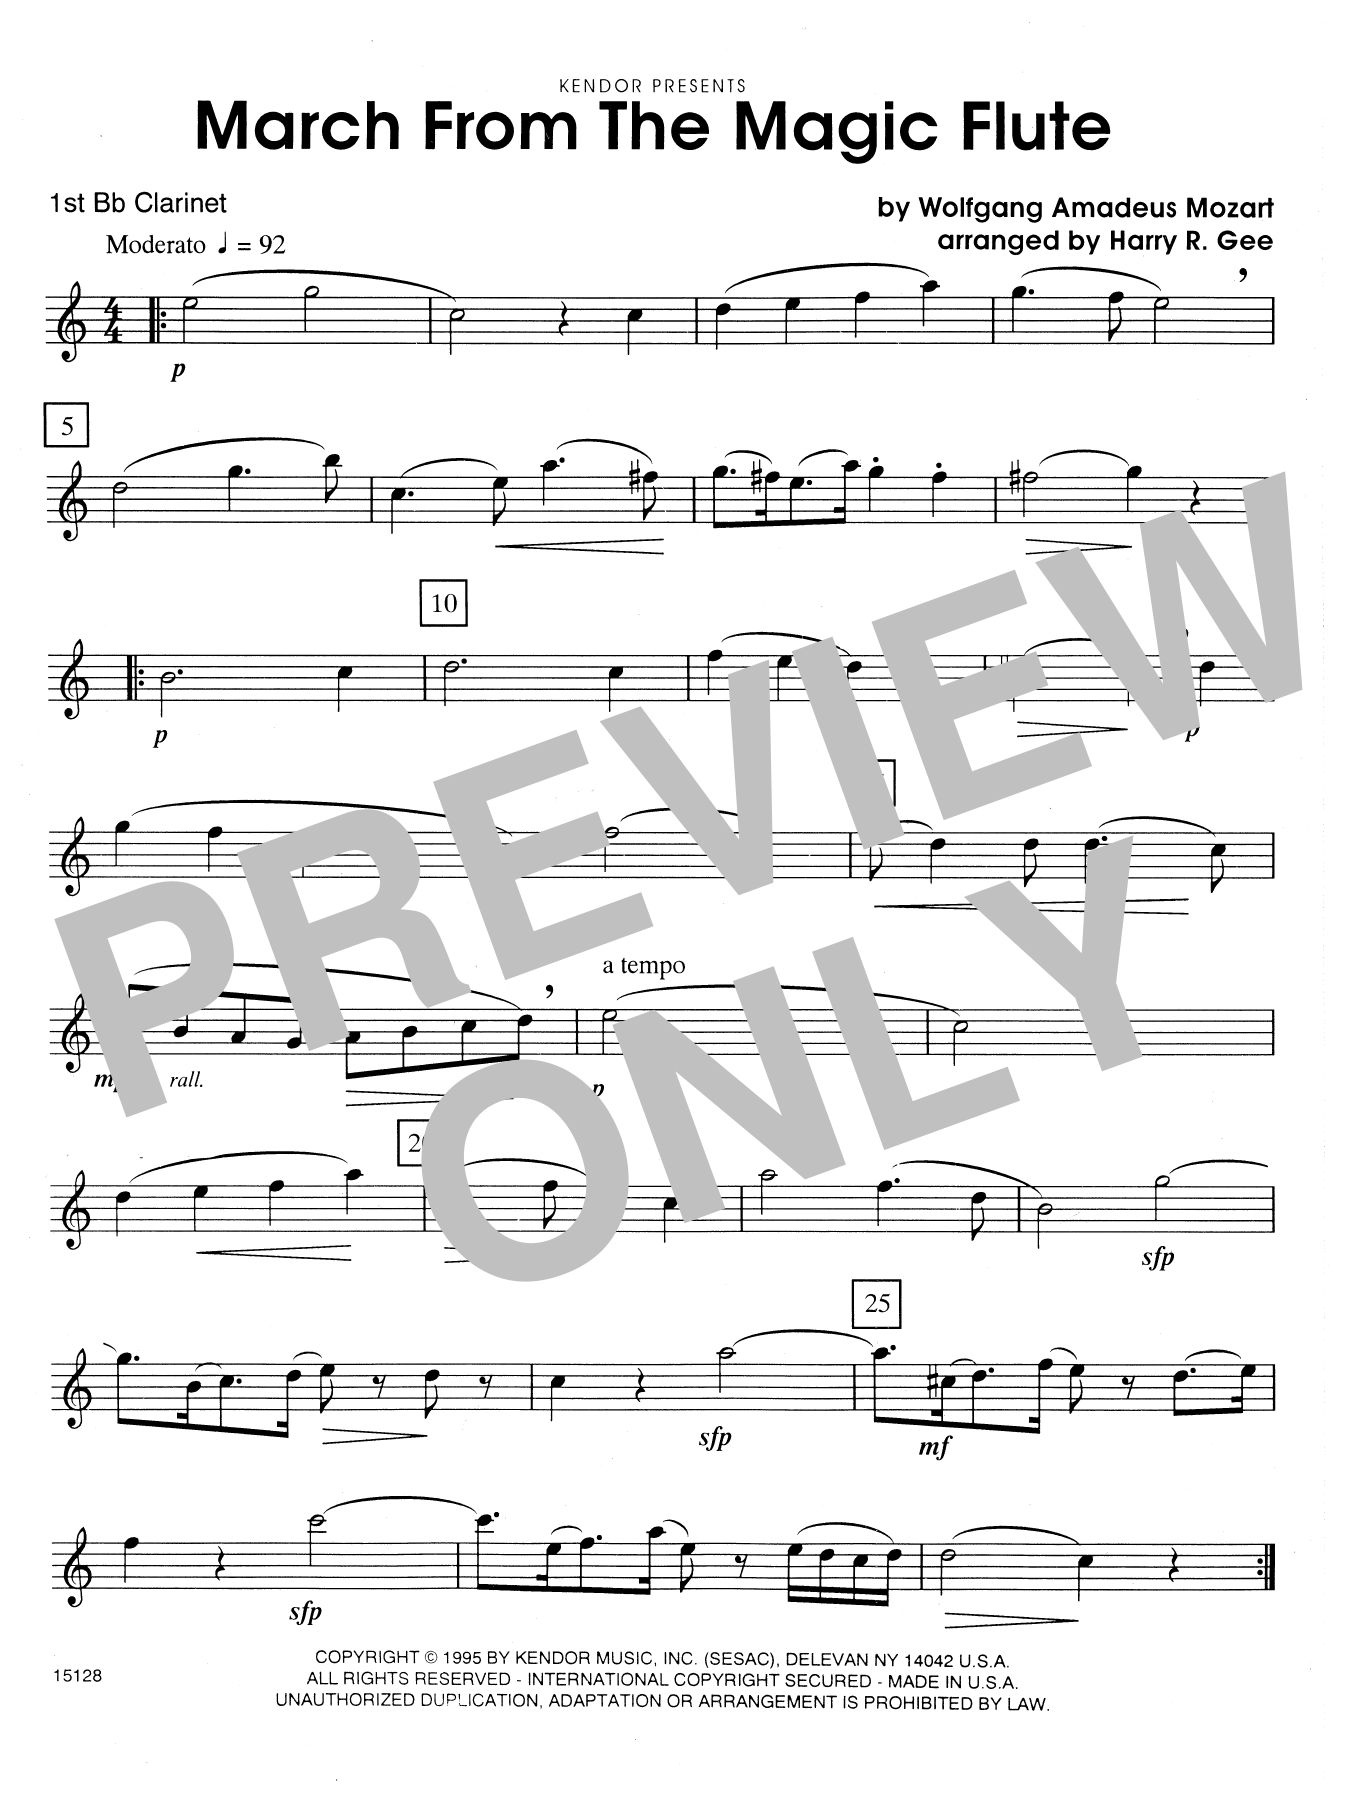 Download Harry R. Gee March From The Magic Flute - 1st Bb Cla Sheet Music